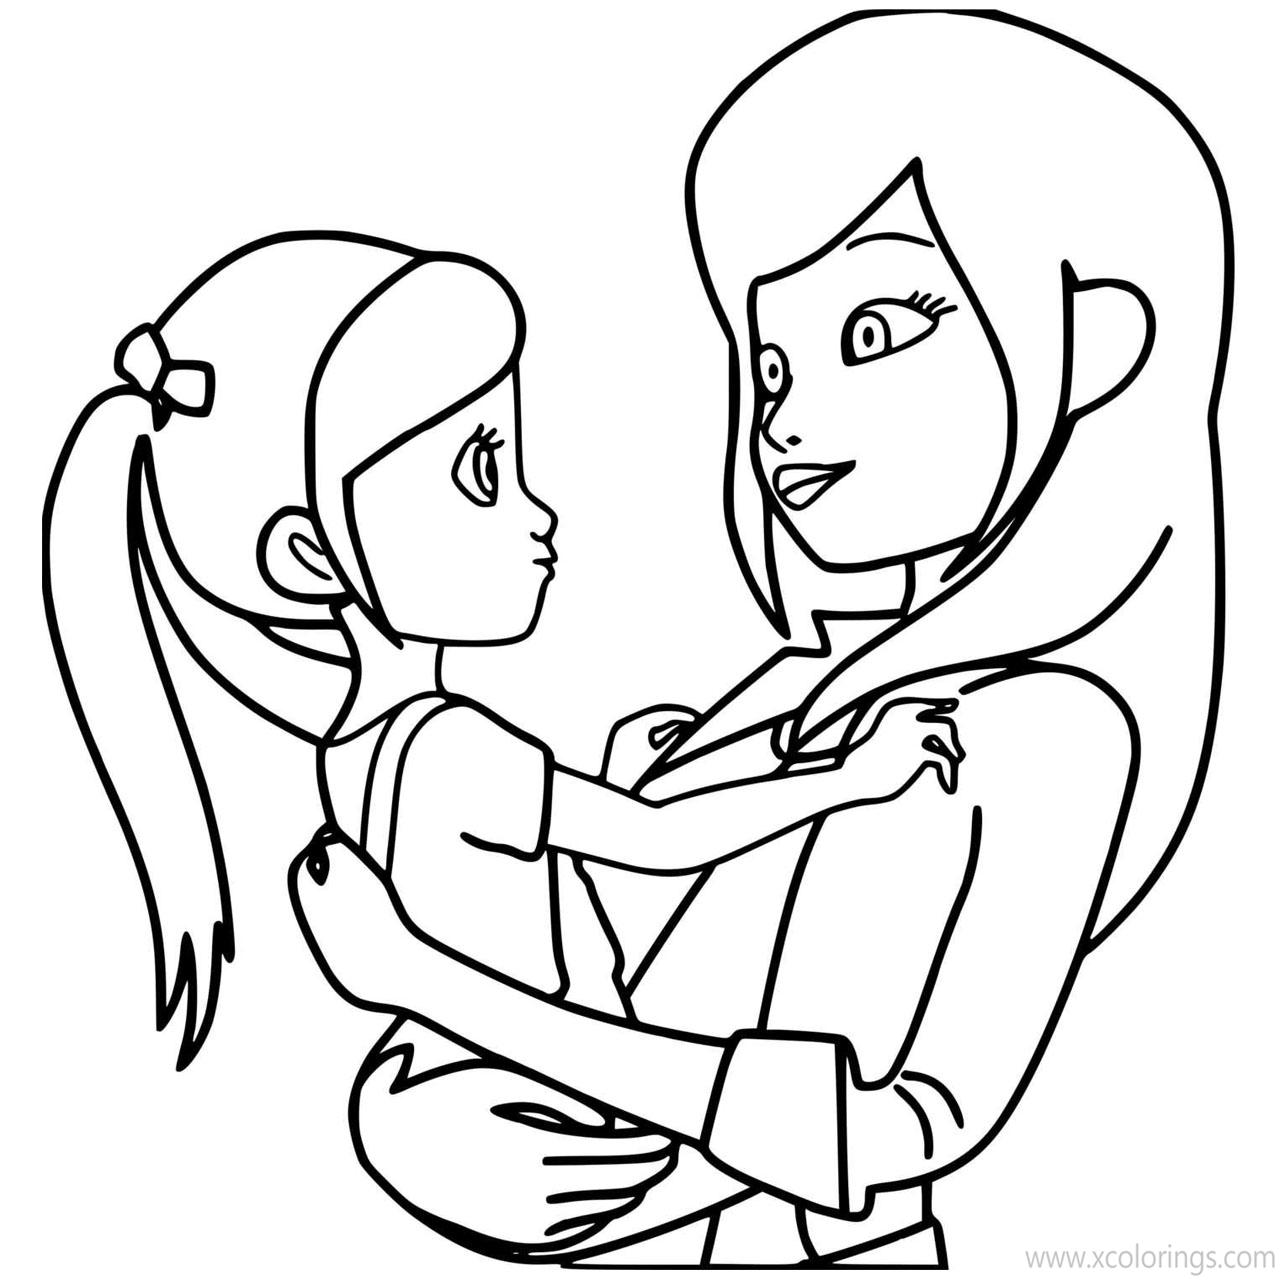 Free Miraculous Ladybug Coloring Pages Ladybug as Mother printable